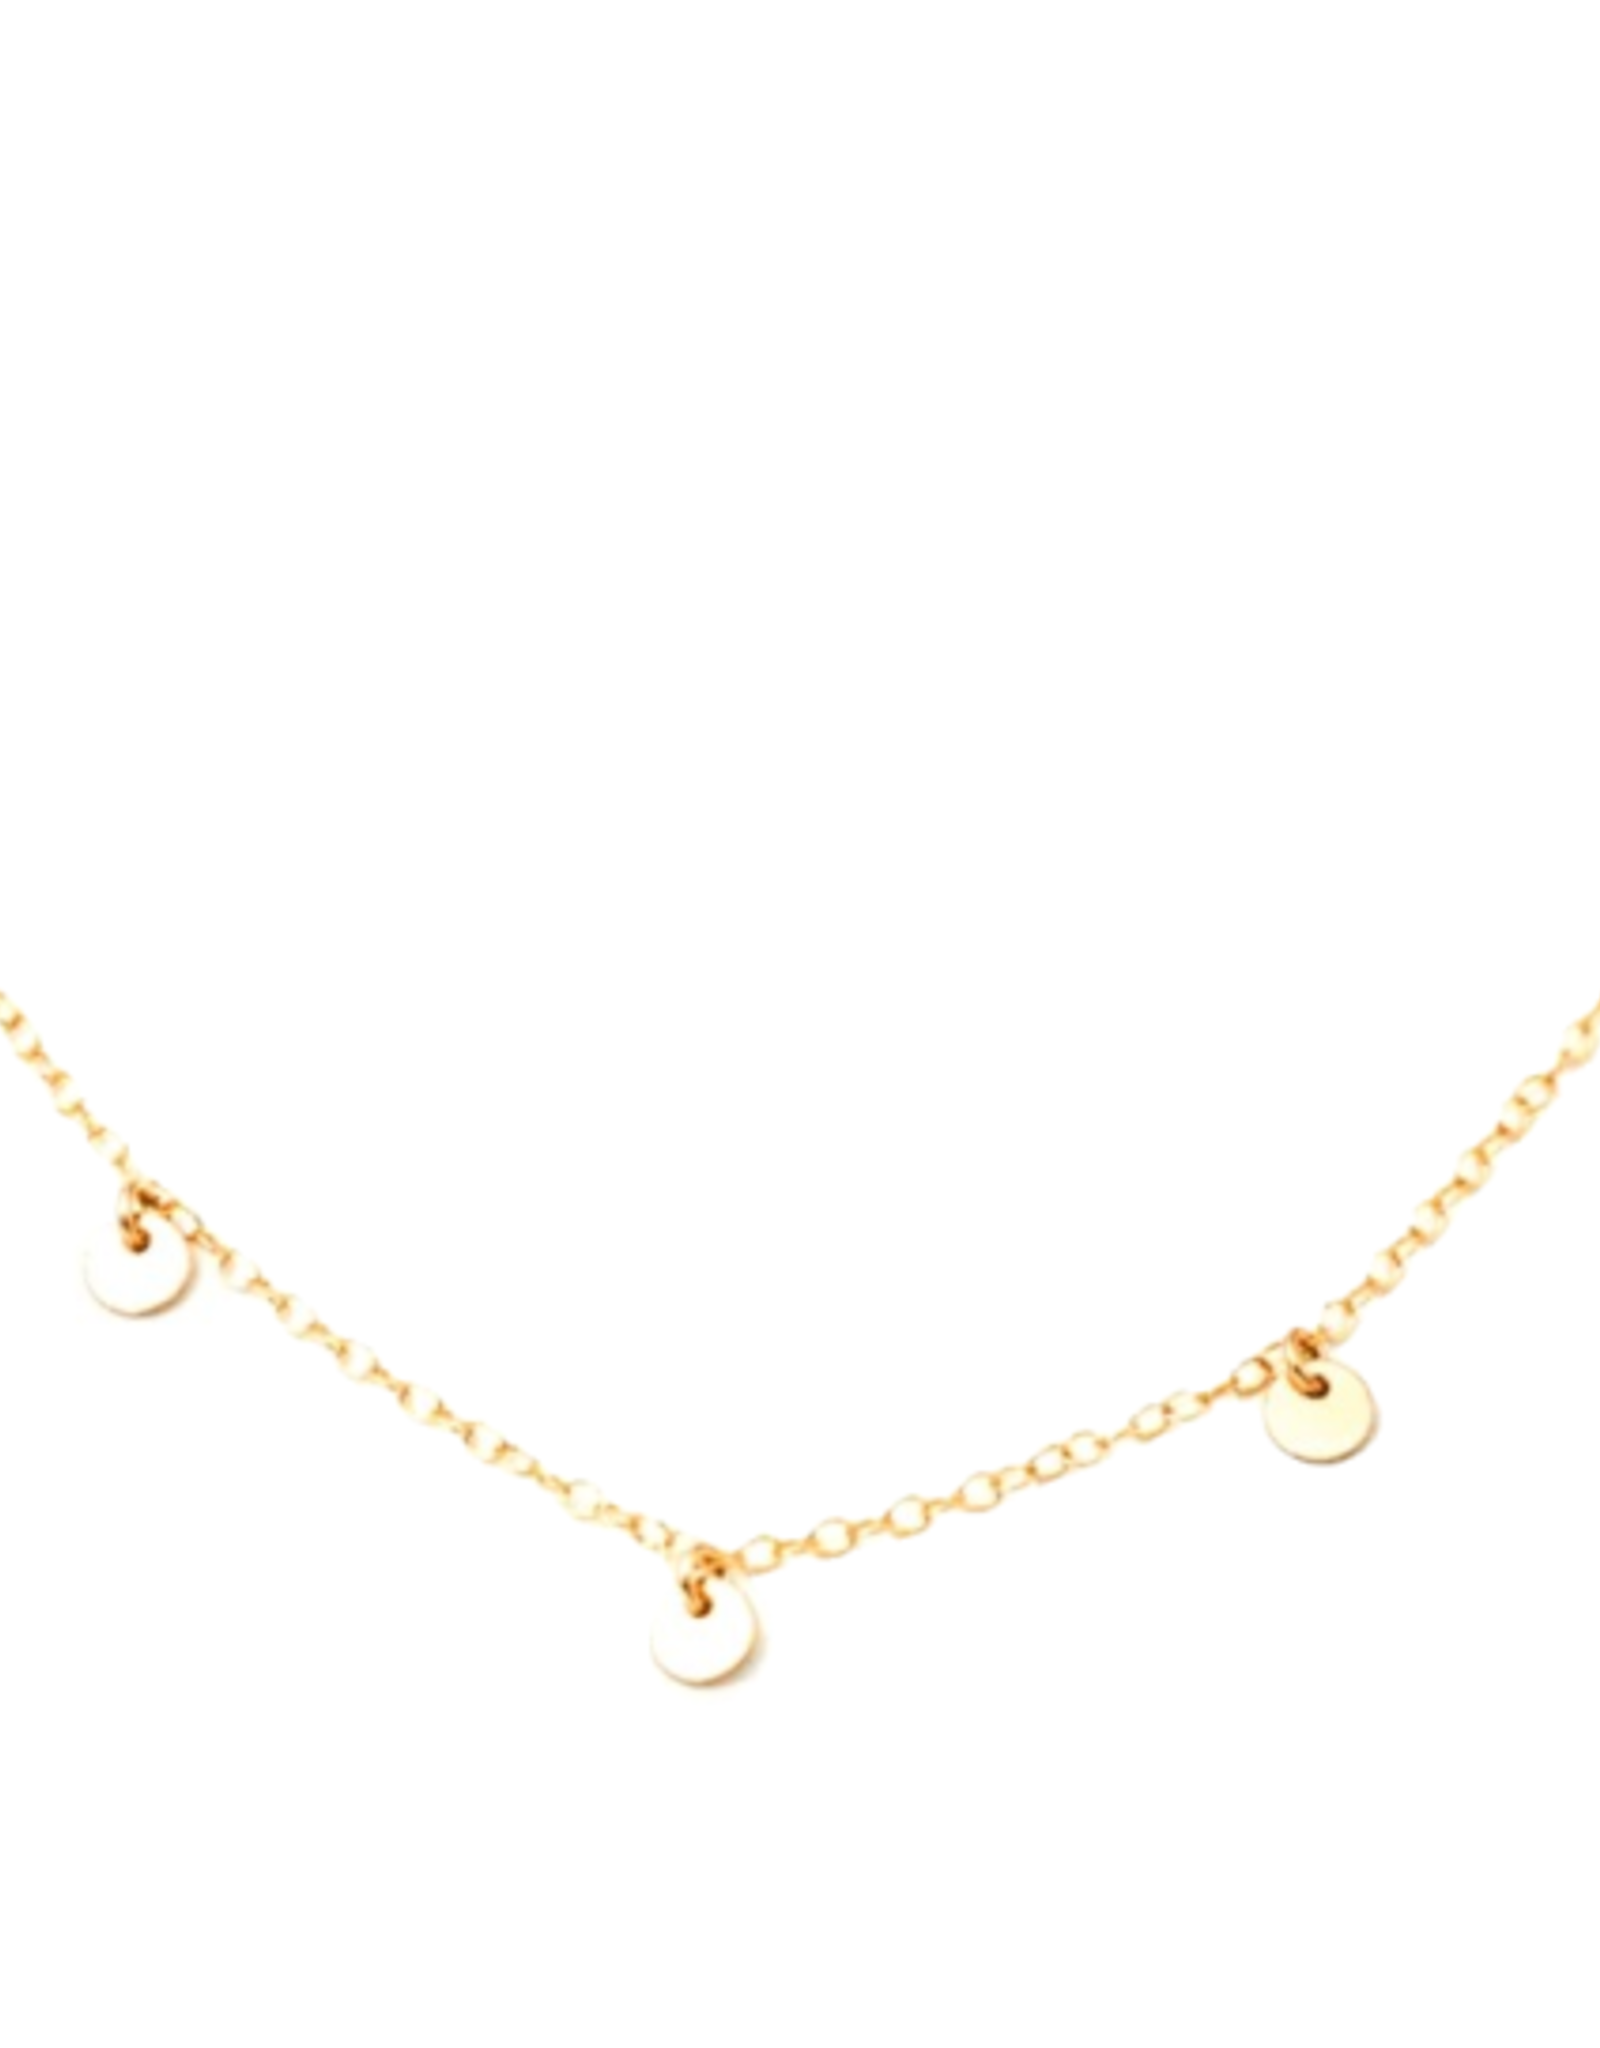 Anklet Small Round Plates on Chain Gold Fill